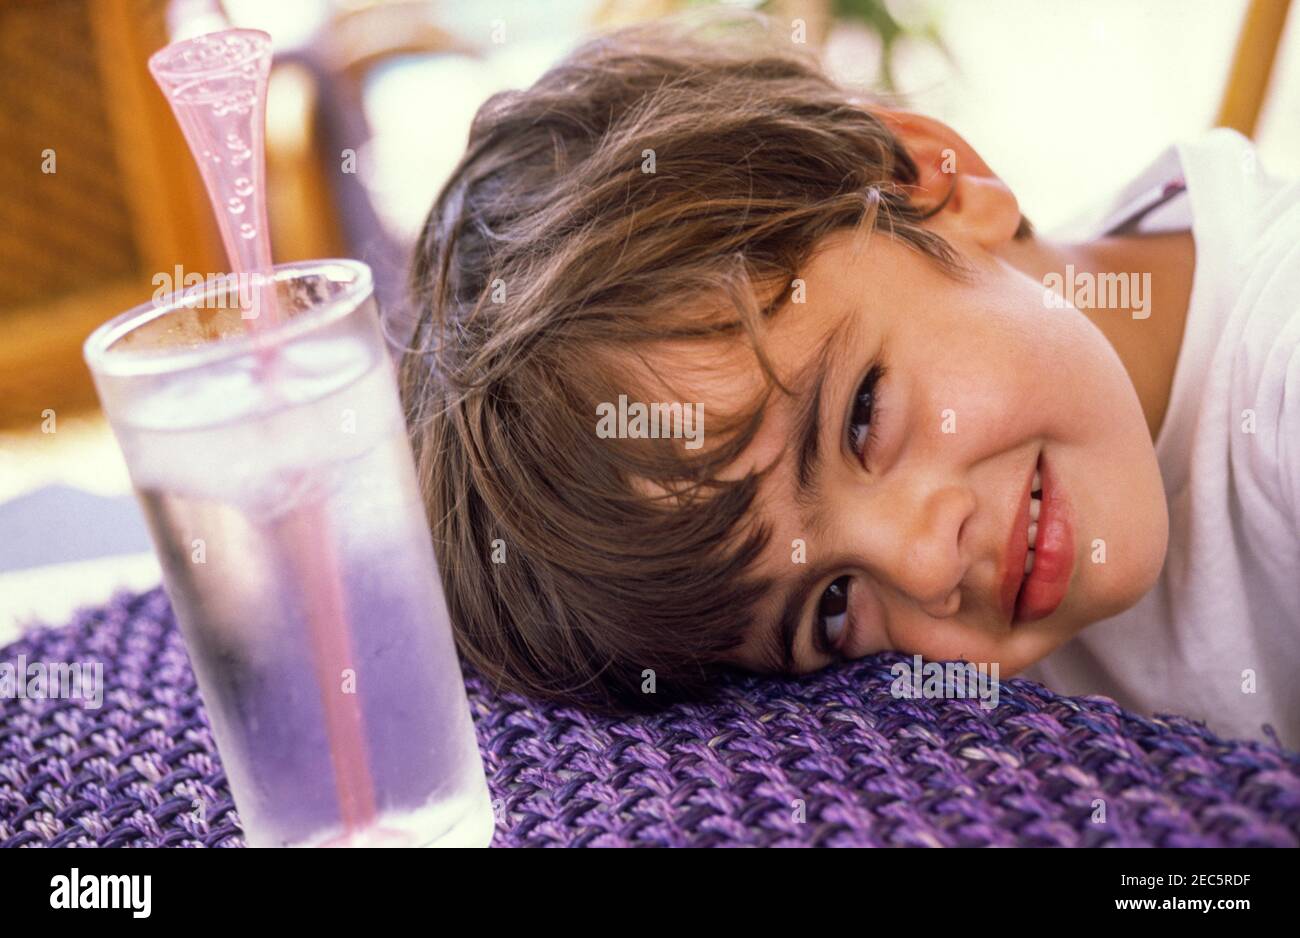 A small boy resting his head on the table, cheekily looking at the camera at an outdoor hotel restaurant in Crete, Greece. Stock Photo